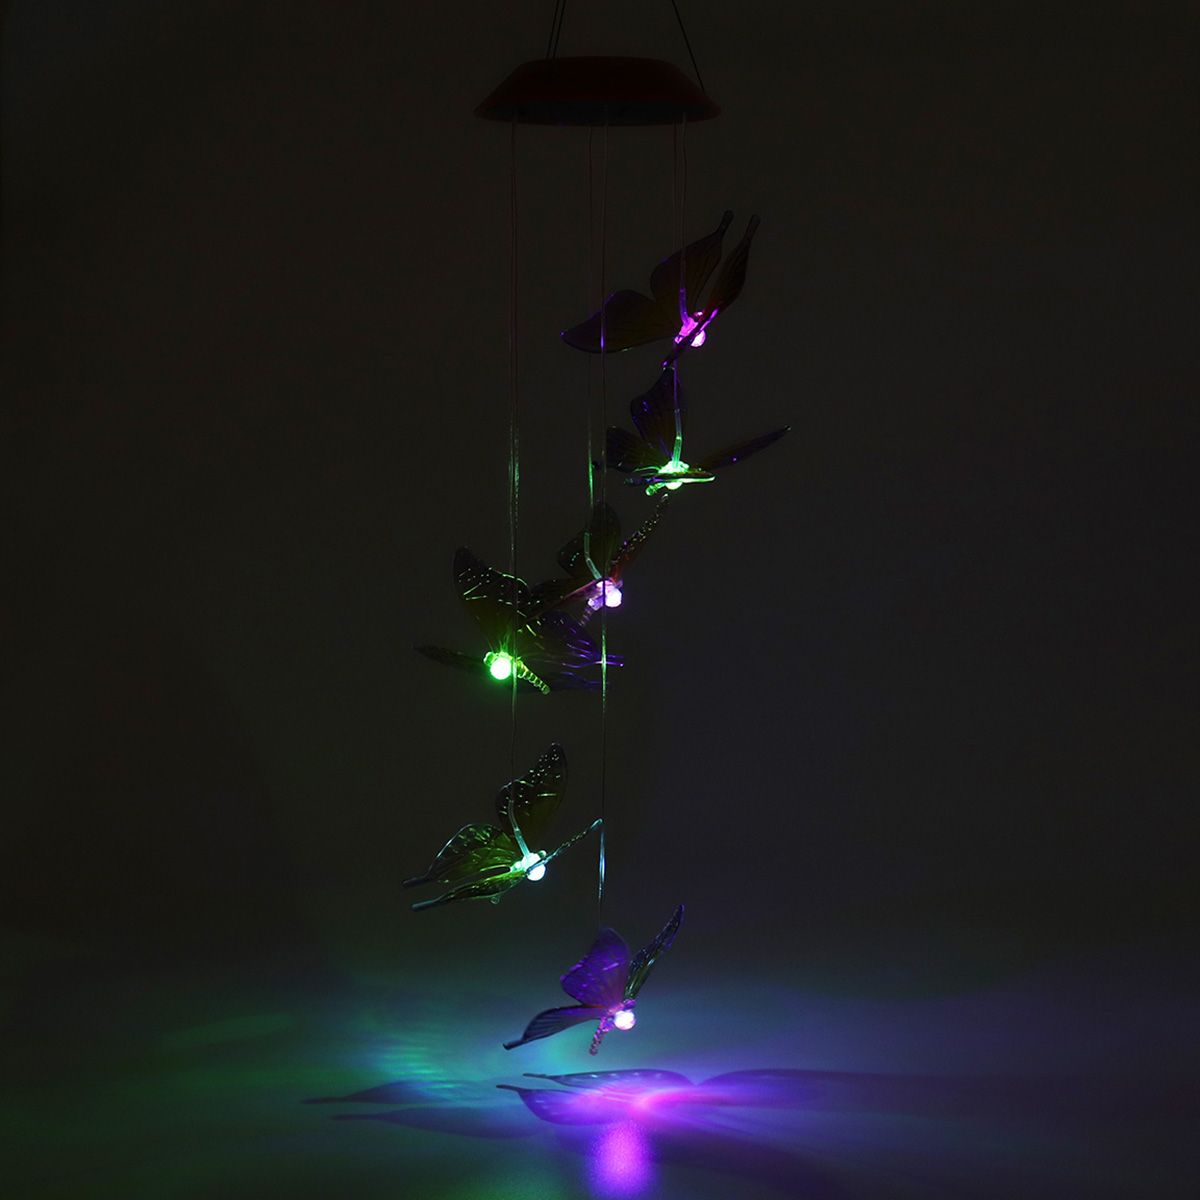 Solar-Powered-LED-Wind-Chime-Light-Hanging-Color-Changing-Yard-Garden-Butterfly-Lamp-Decor-1724567